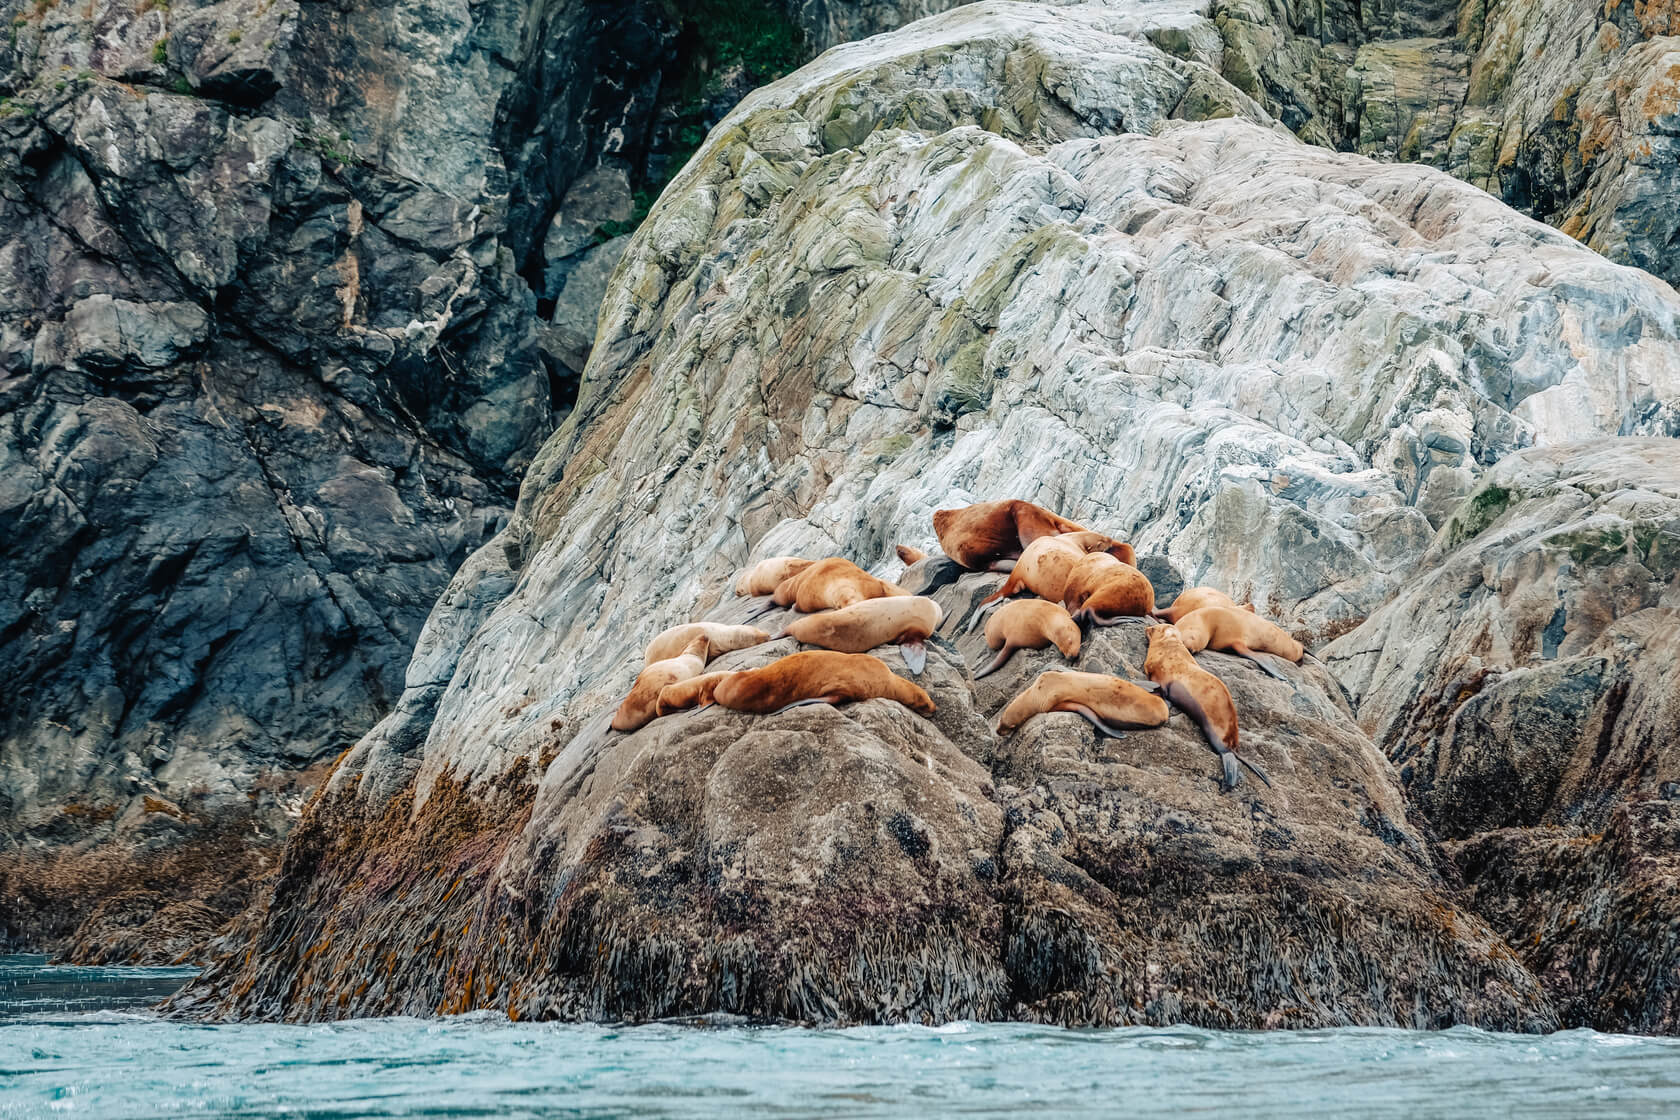 Walruses lounging on a rock